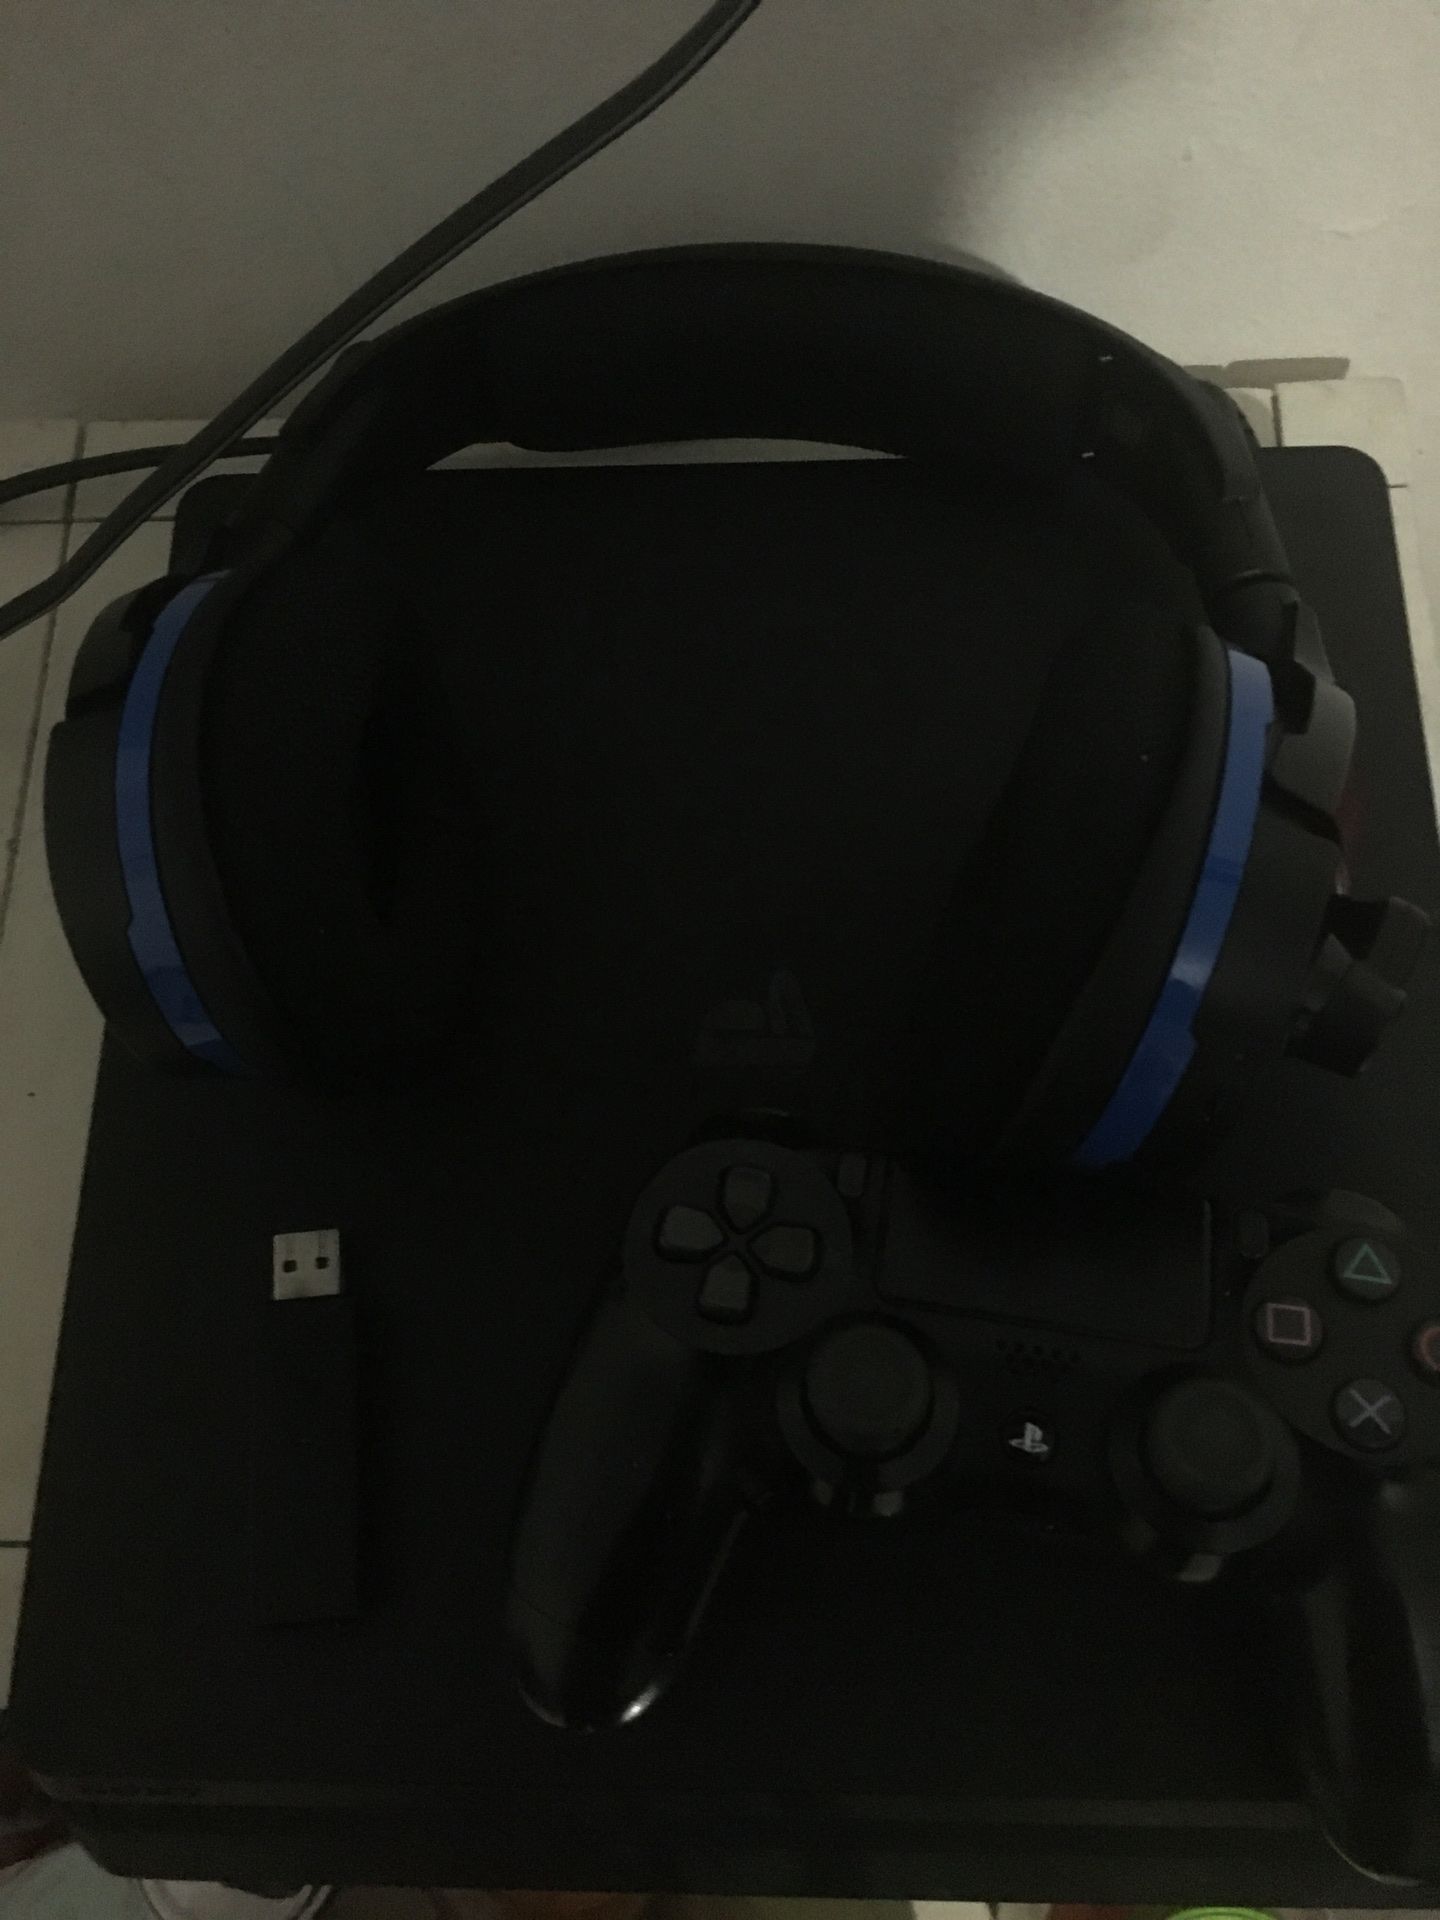 PS4 slim wireless headset with controller